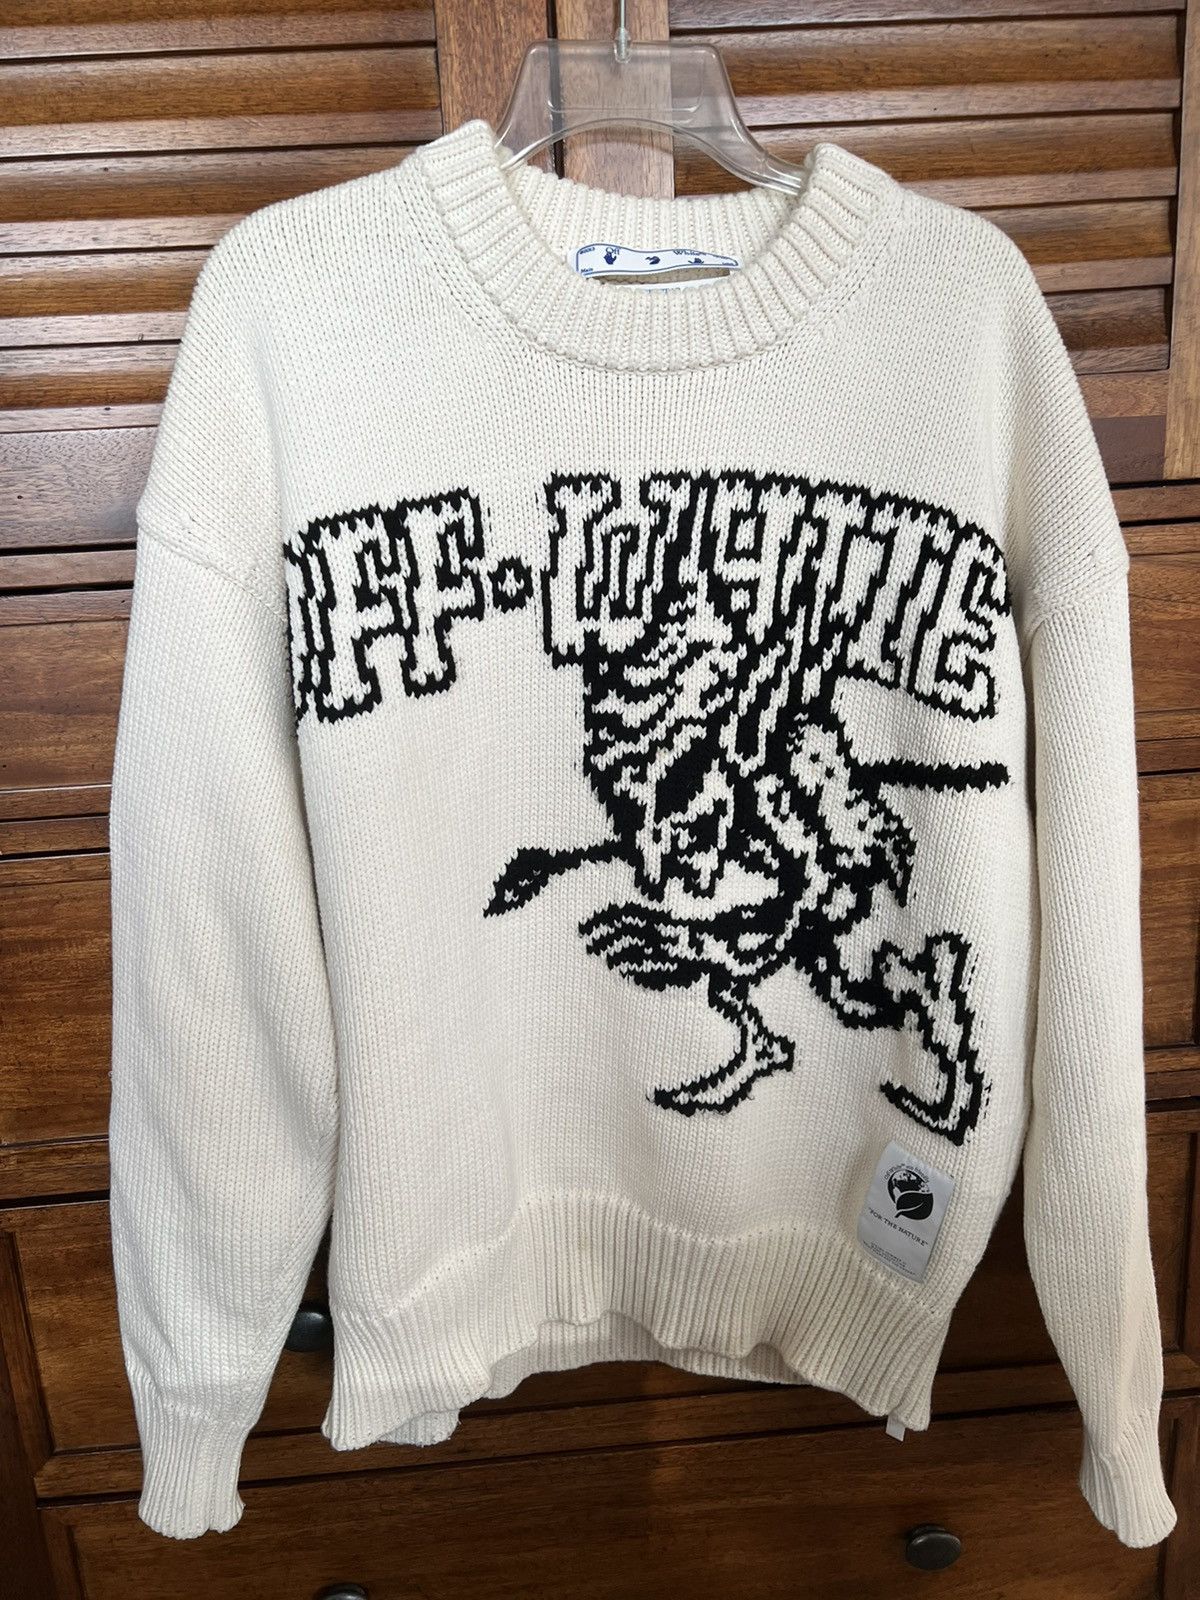 Off-White For The Nature Elfin Sweater on SALE